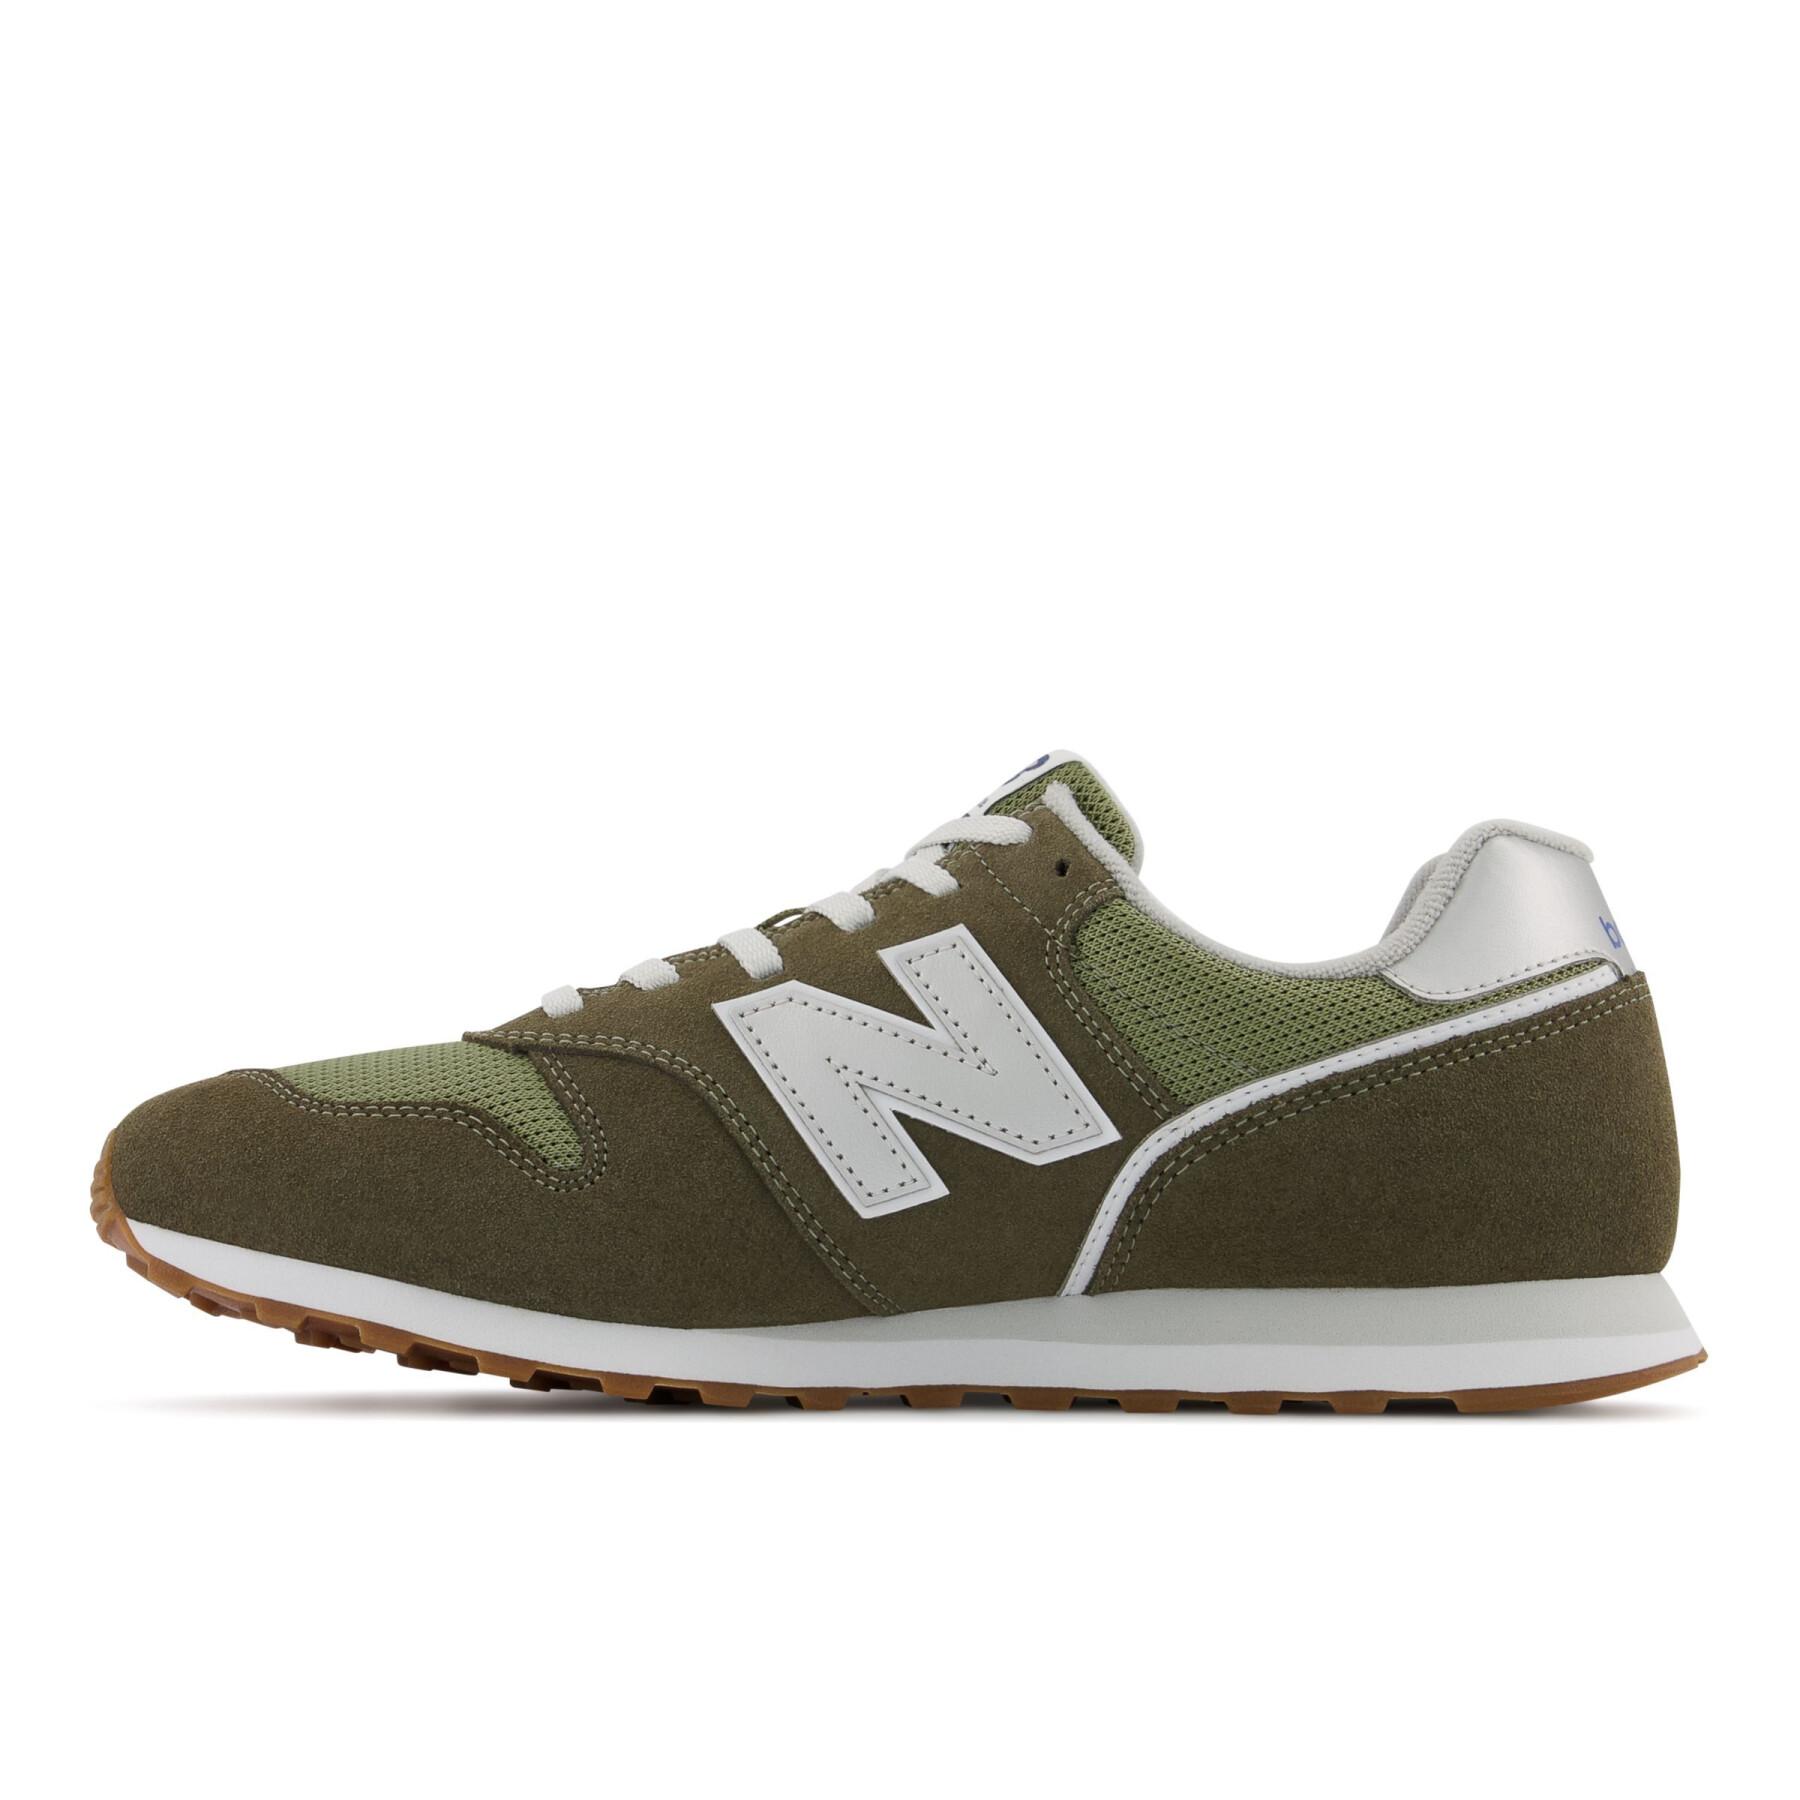 Sneakers New Balance 373v2